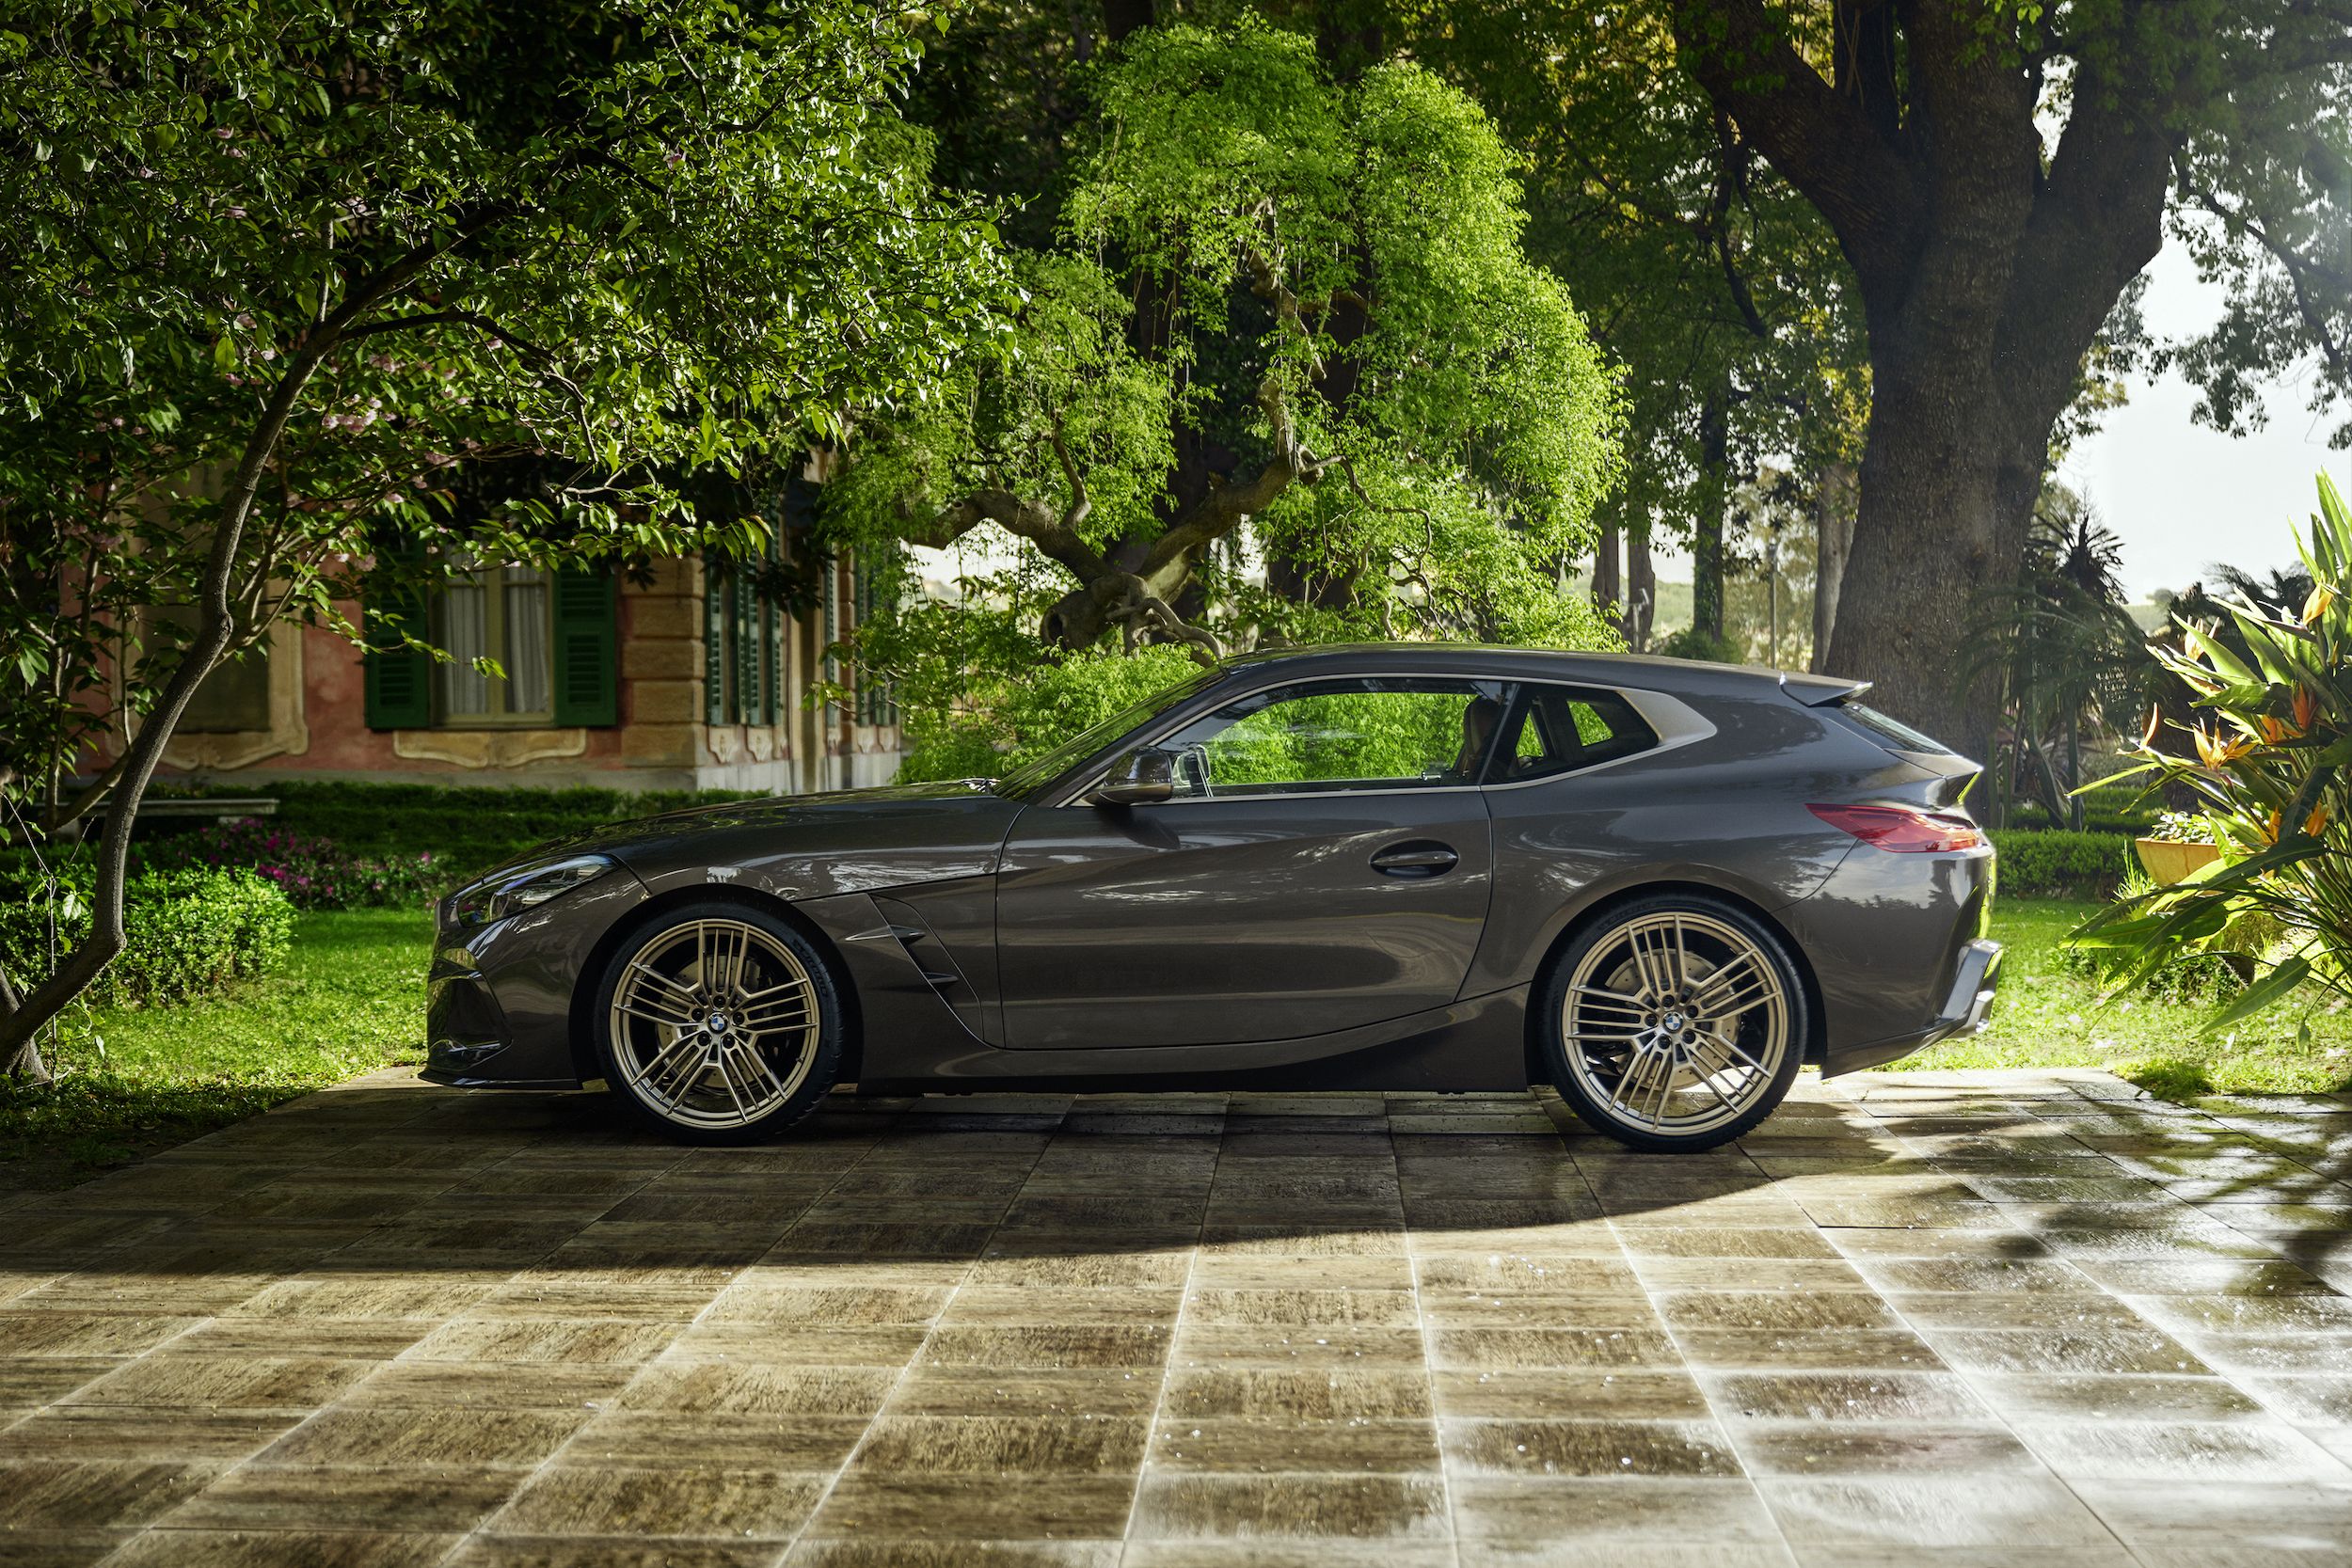 BMW Might Build 50 New Z4 Clownshoes at $250,000 Each